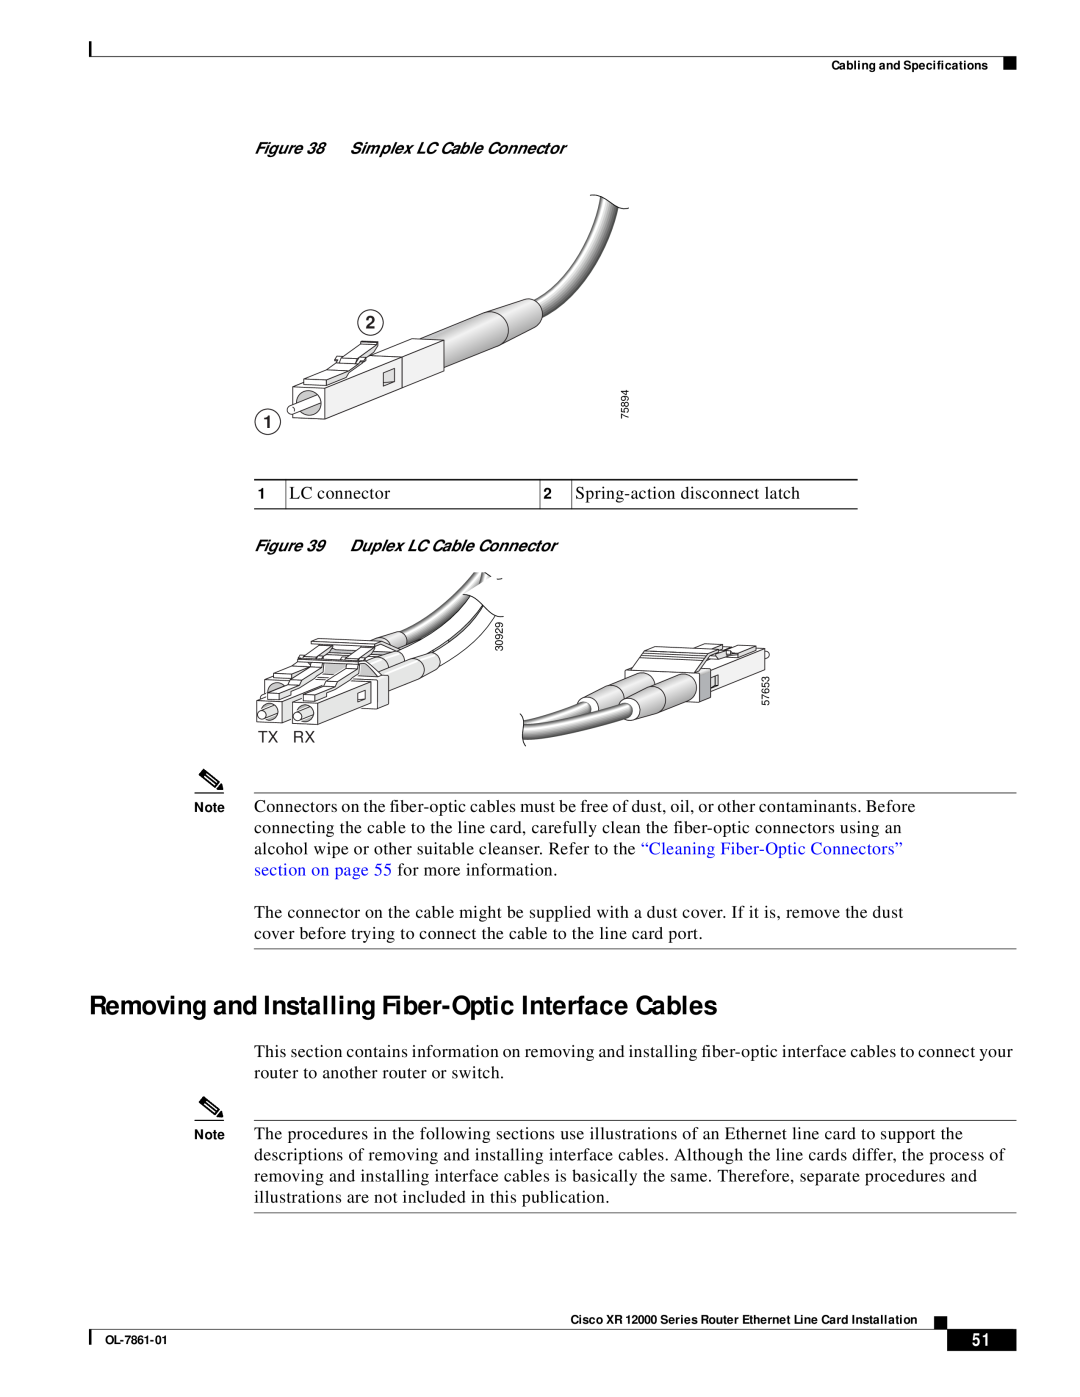 Cisco Systems OL-7861-01 manual Removing and Installing Fiber-Optic Interface Cables 